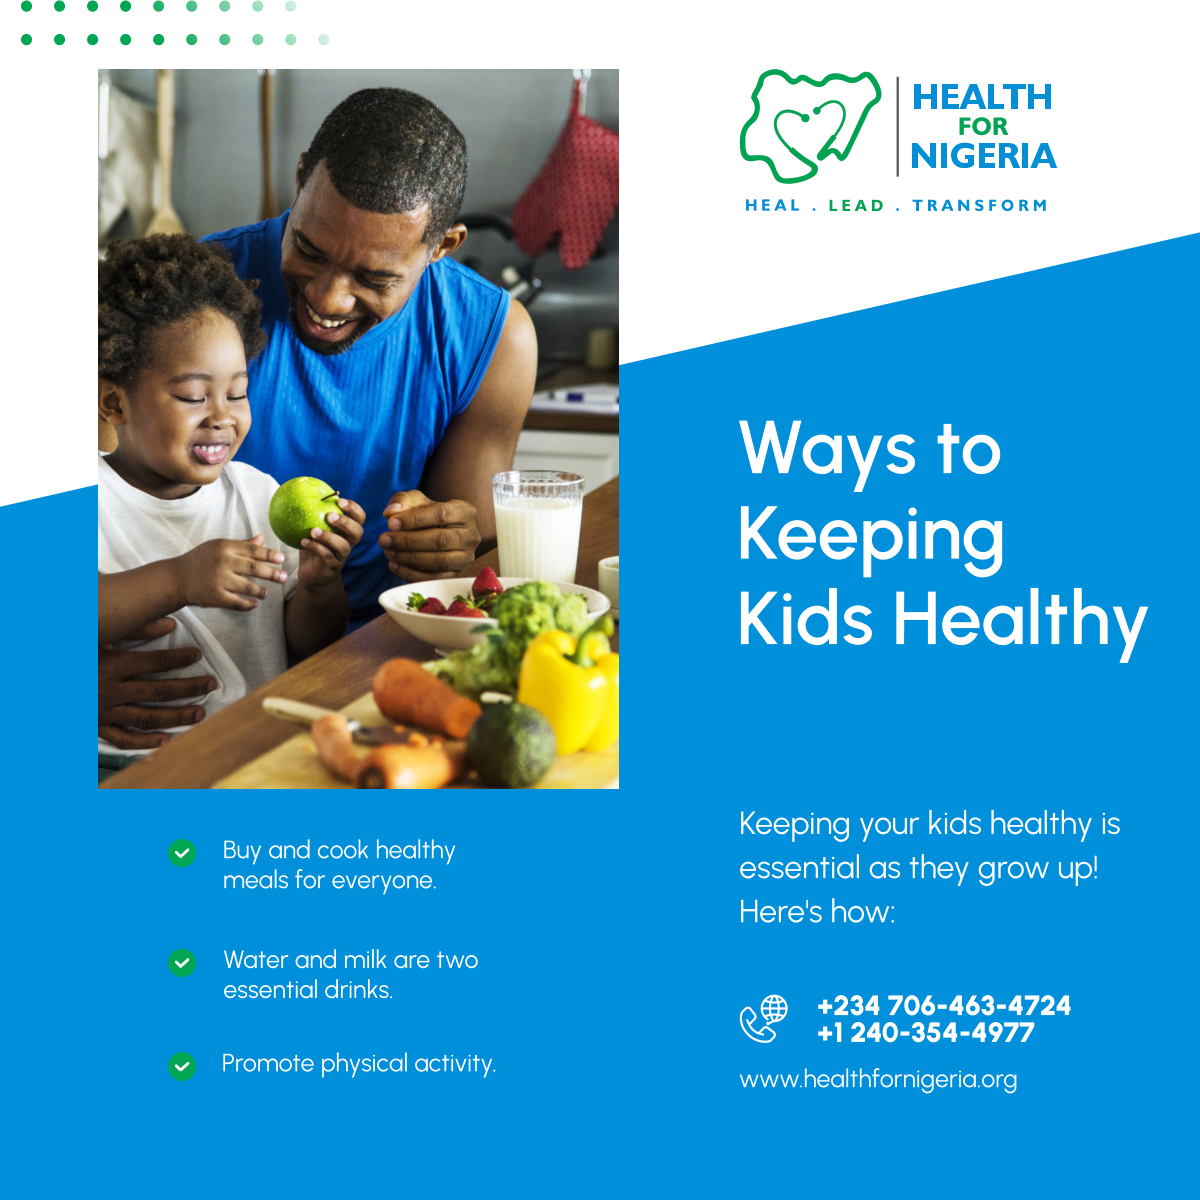 Read more about how you can promote healthy lifestyle practices for your kids and the whole family here: tinyurl.com/2vu35pmv

#HealthyLifestyle #Kids #CharityOrganization #HealthForNigeria